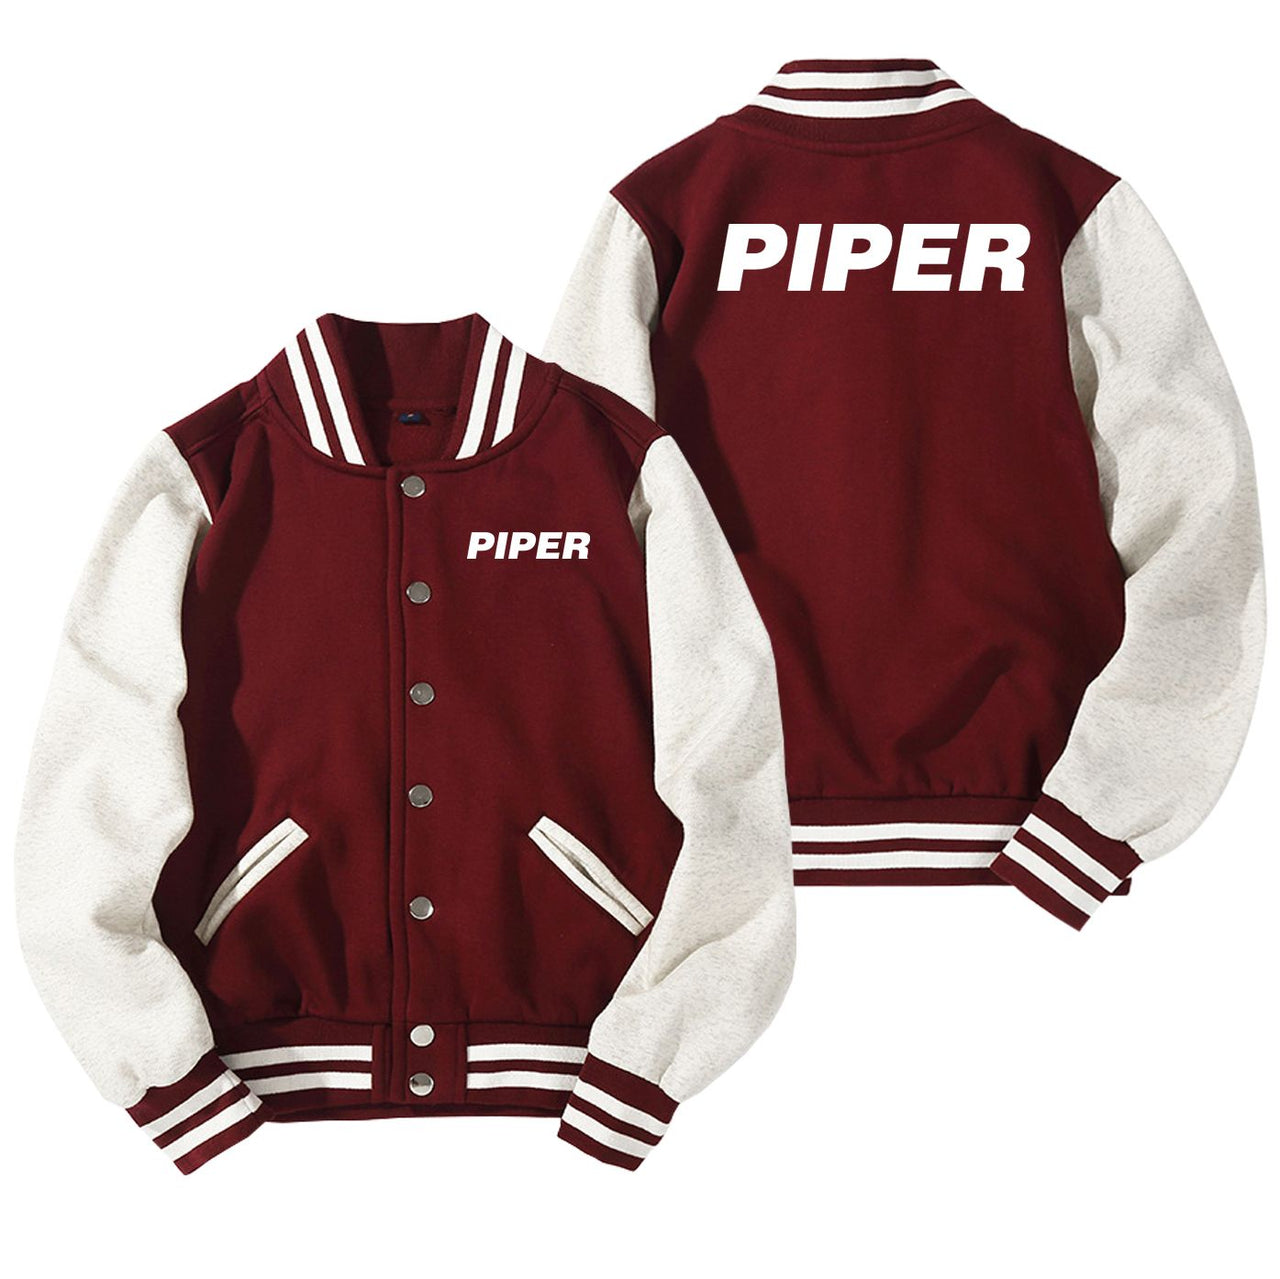 Piper & Text Designed Baseball Style Jackets